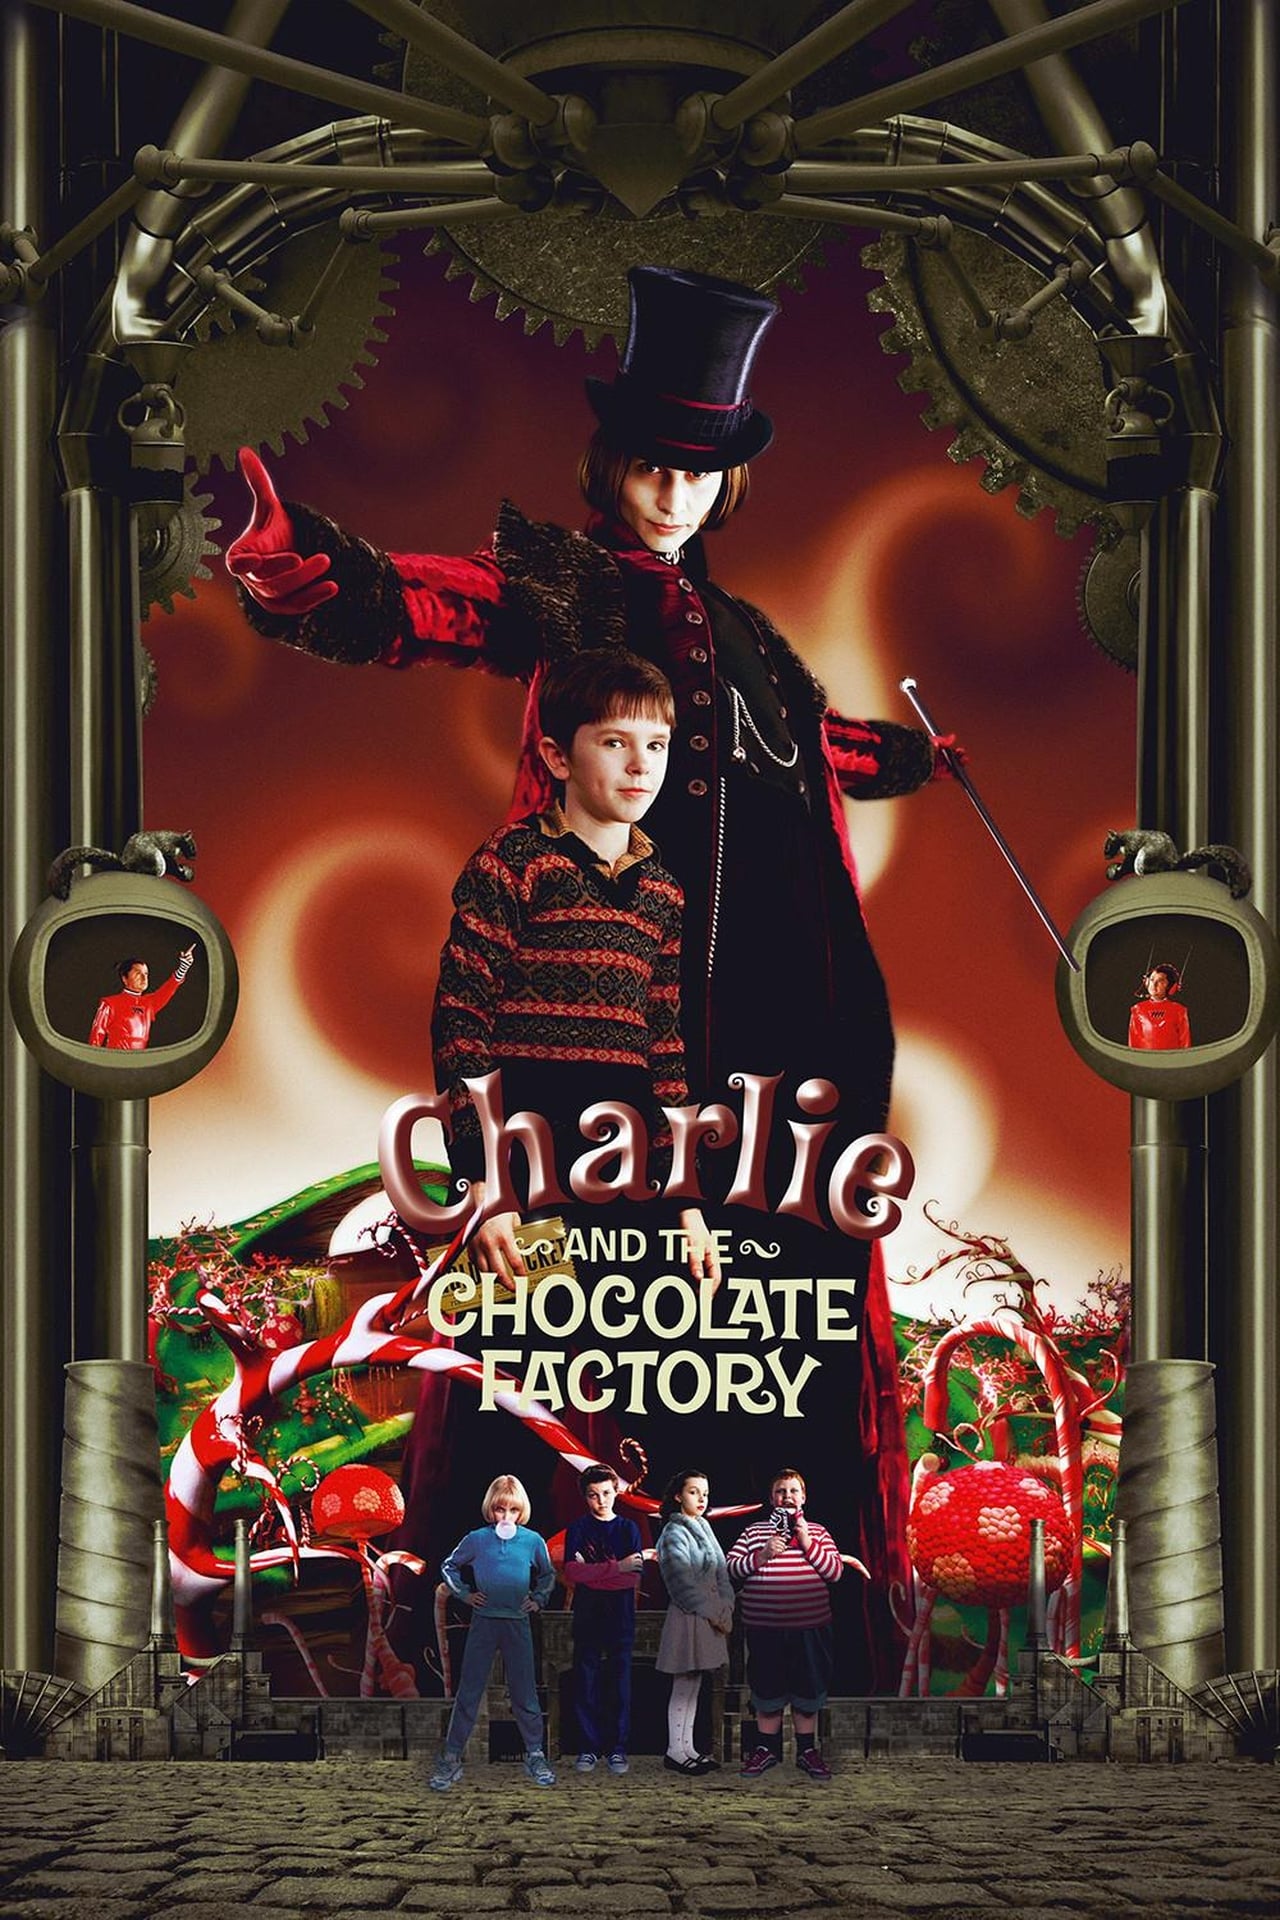 Watch Streaming Charlie and the Chocolate Factory (2005) Movie at - Where Can I Watch Charlie And The Chocolate Factory